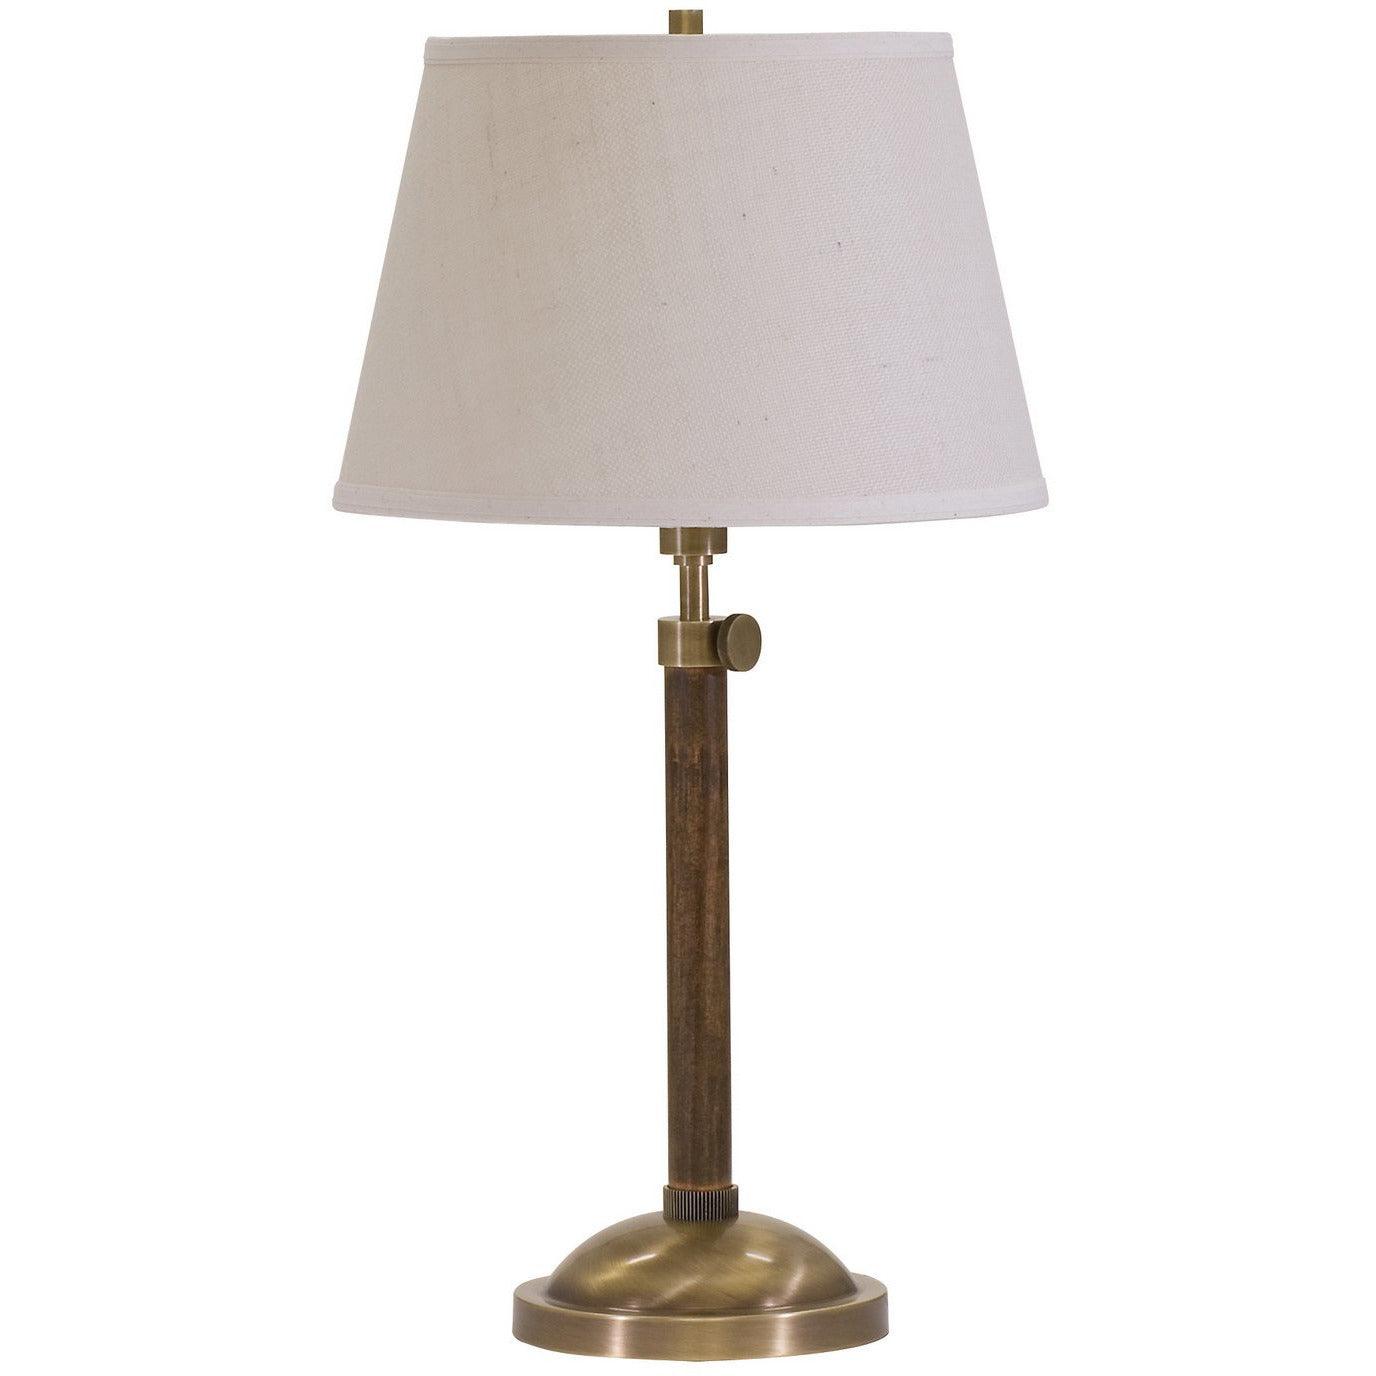 House of Troy - Richmond One Light Table Lamp - R450-AB | Montreal Lighting & Hardware